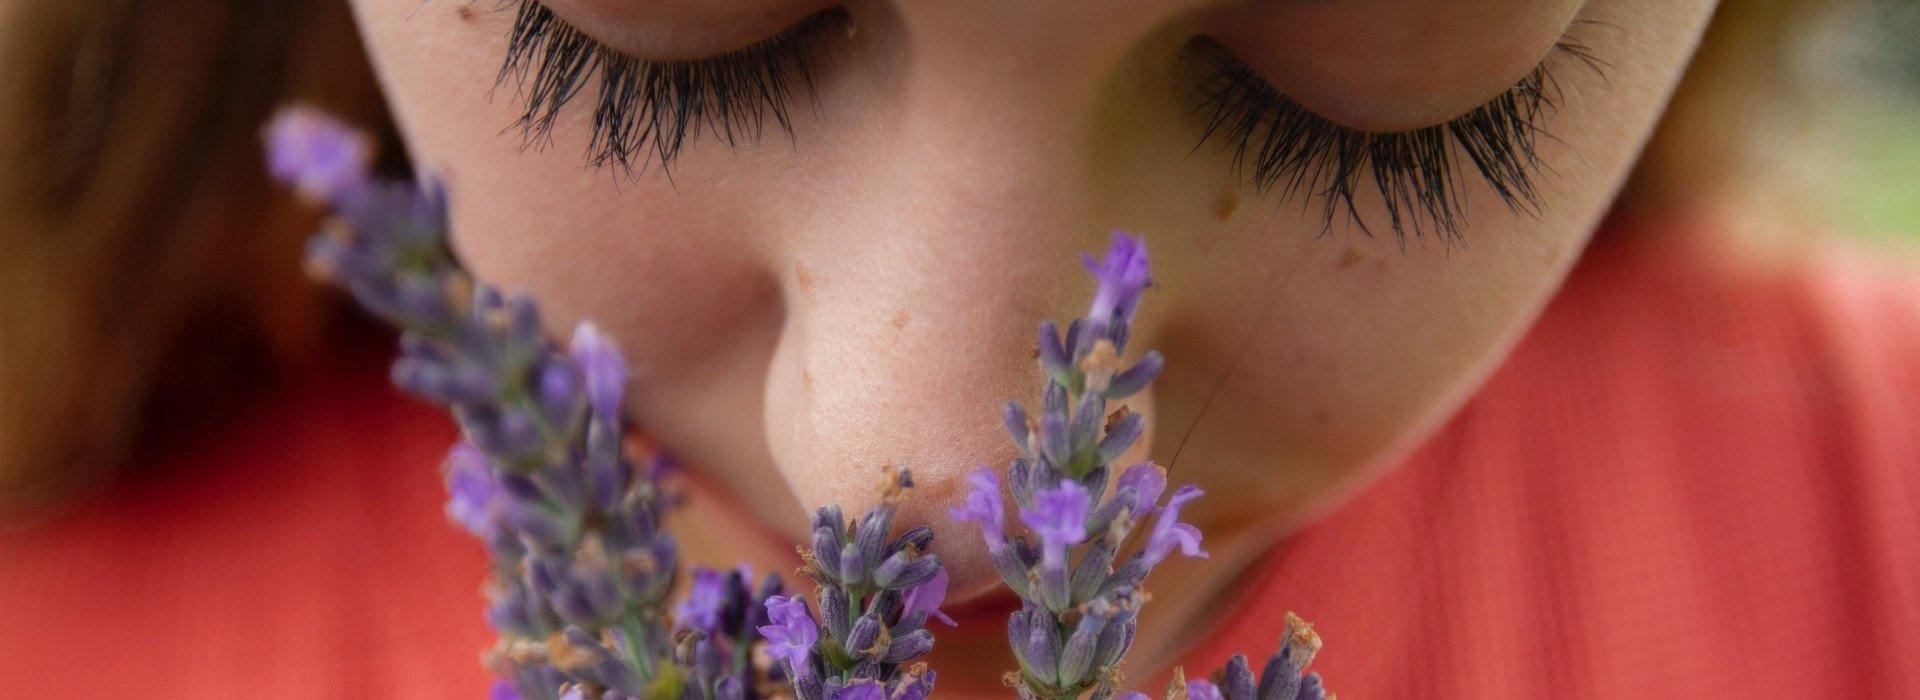 Will Castor Oil Help Your Eyelashes Grow? - ForChics